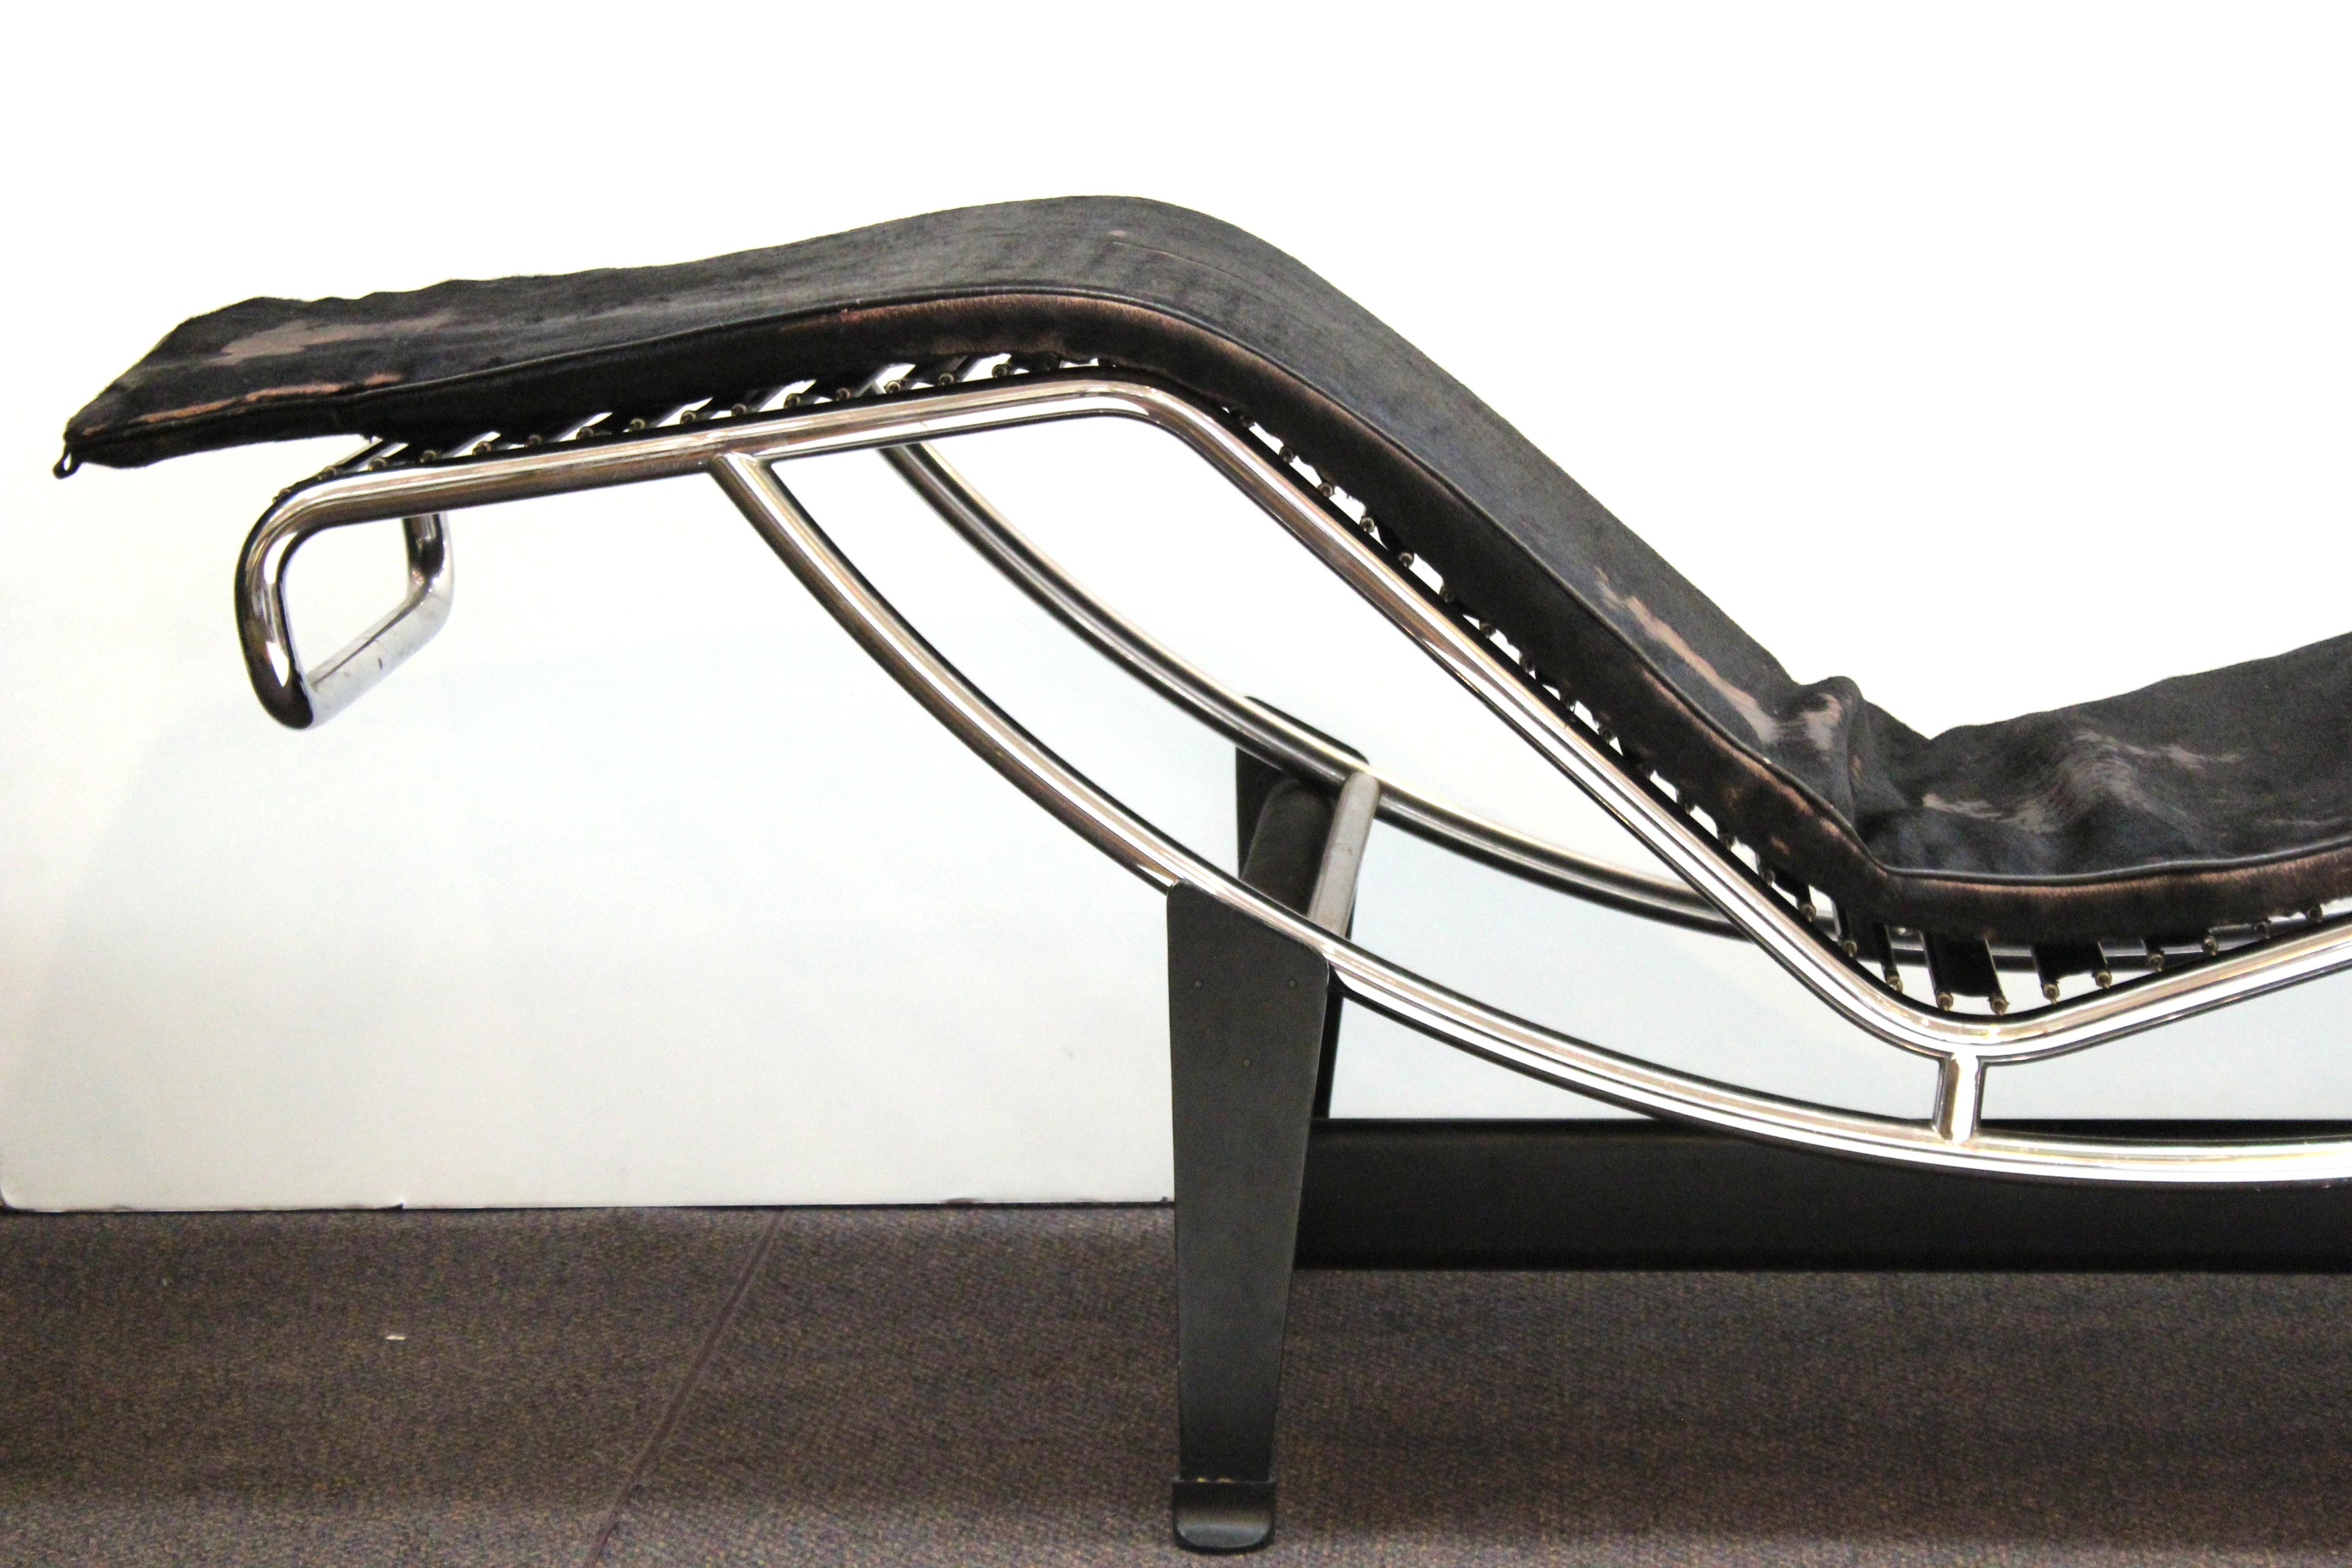 Modernist LC4 iconic chaise lounge or daybed, originally designed by Le Corbusier in the 1920s. The piece has its original leather cushioning and pillow. Age-appropriate wear to the leather surfaces and to the pillow. The structure is in great